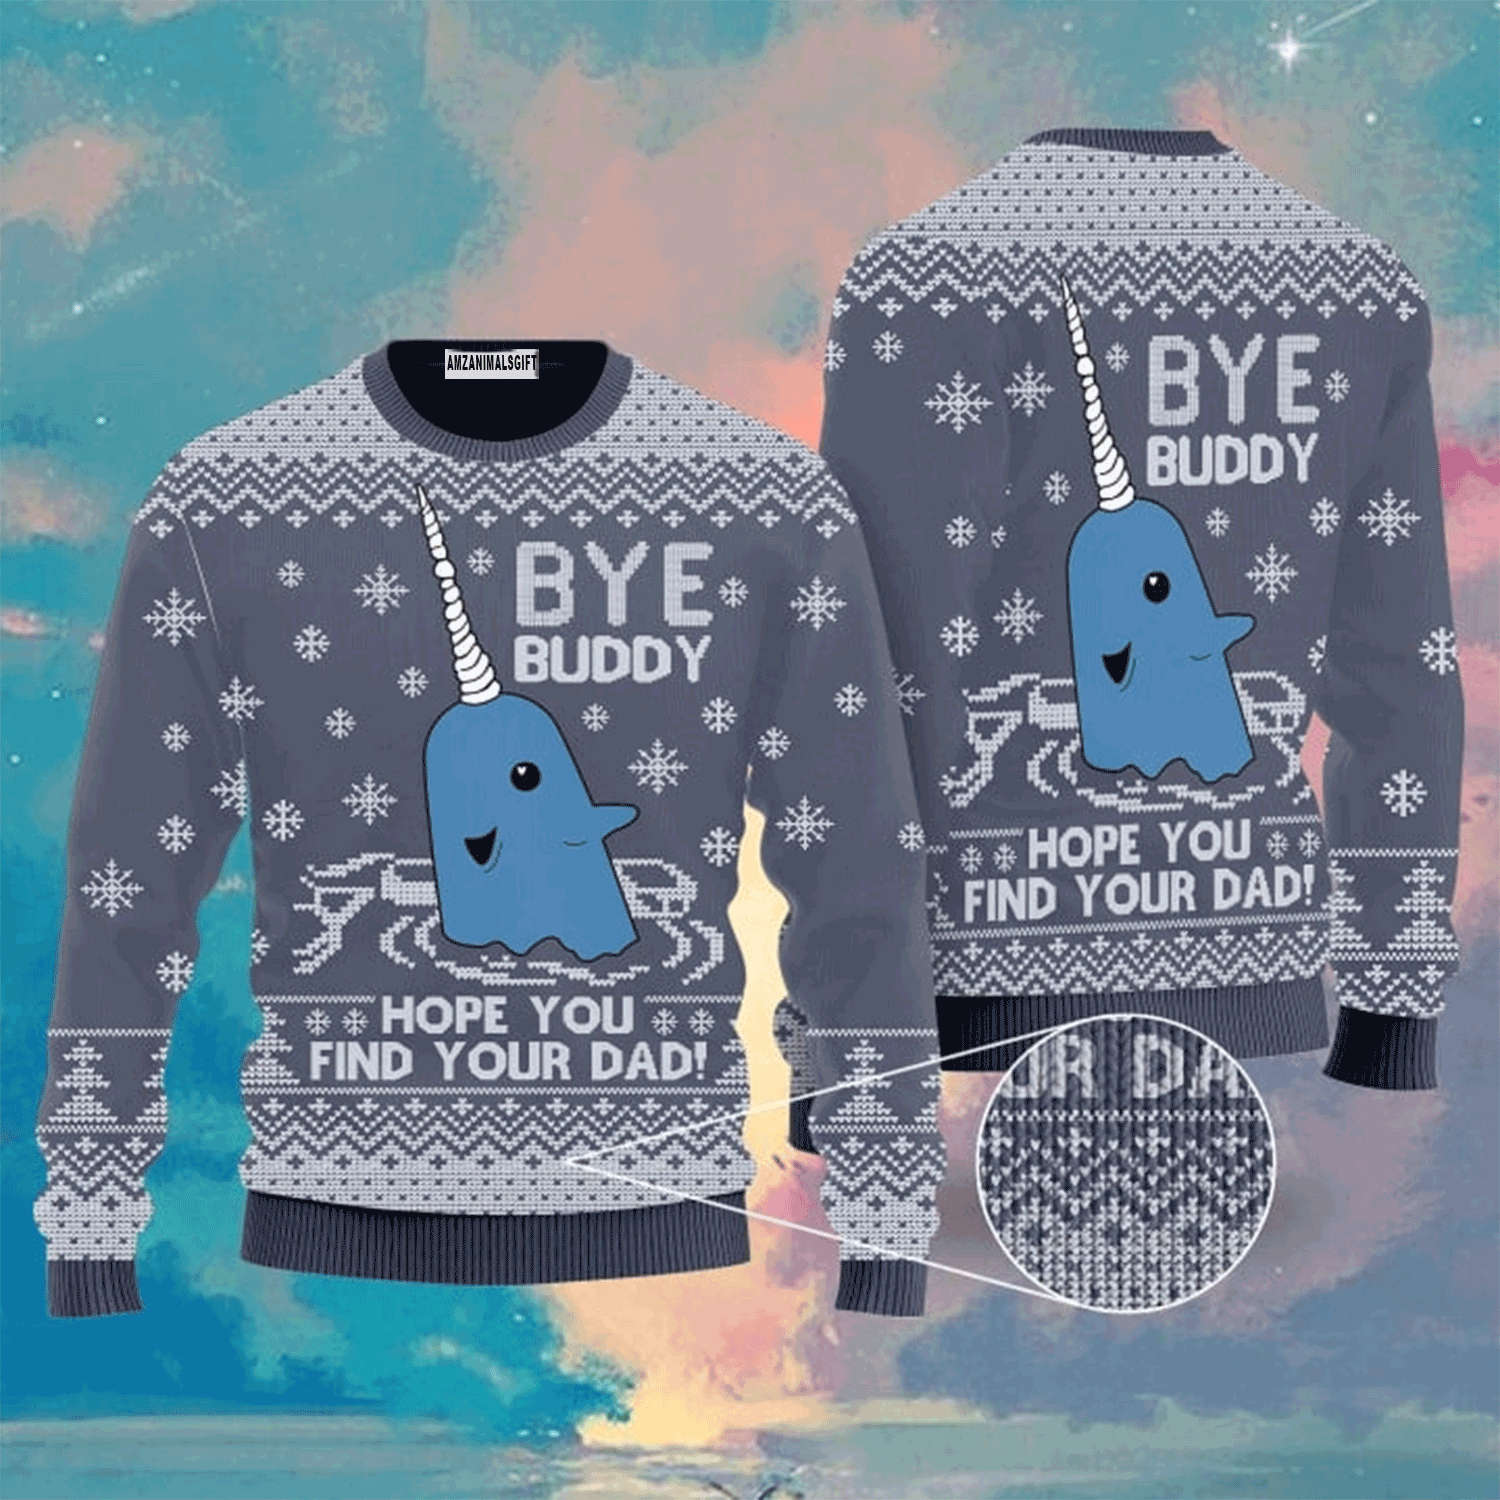 Bye Buddy Hope You Find Your Dad Christmas Sweater, Ugly Sweater For Men & Women, Perfect Outfit For Christmas New Year Autumn Winter